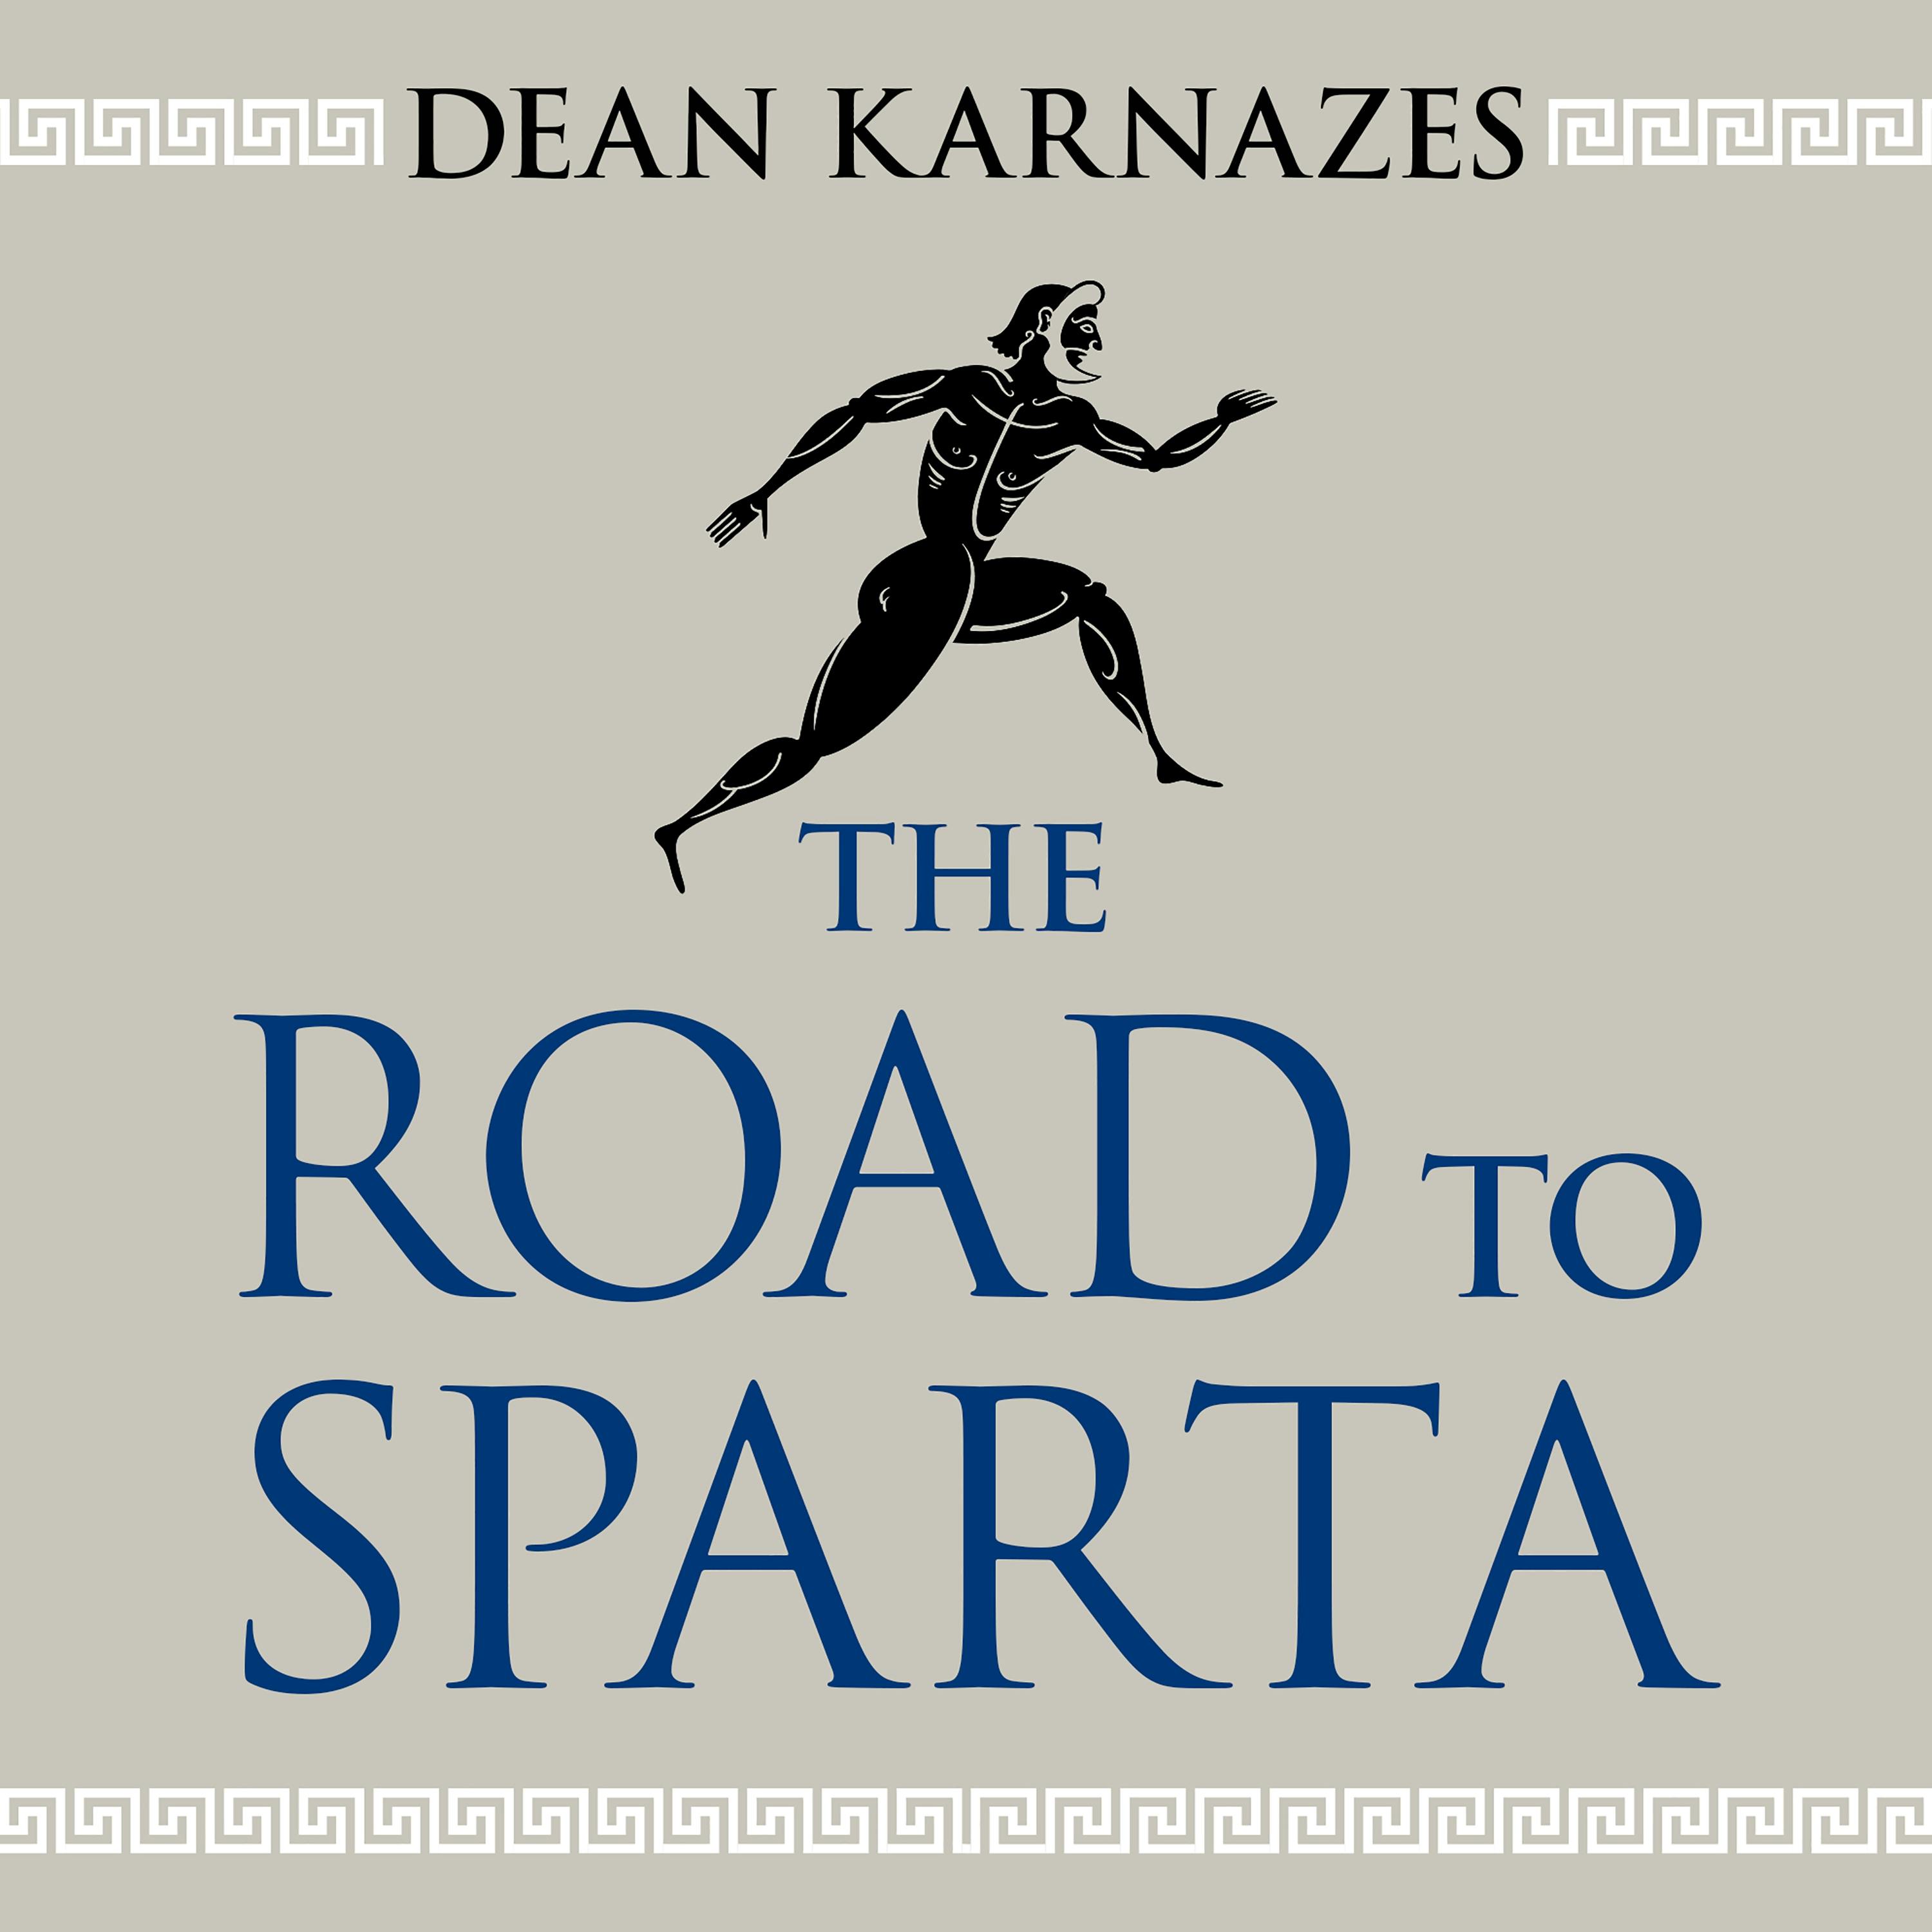 The Road to Sparta: Reliving the Ancient Battle and Epic Run That Inspired the World's Greatest Footrace - Dean Karnazes